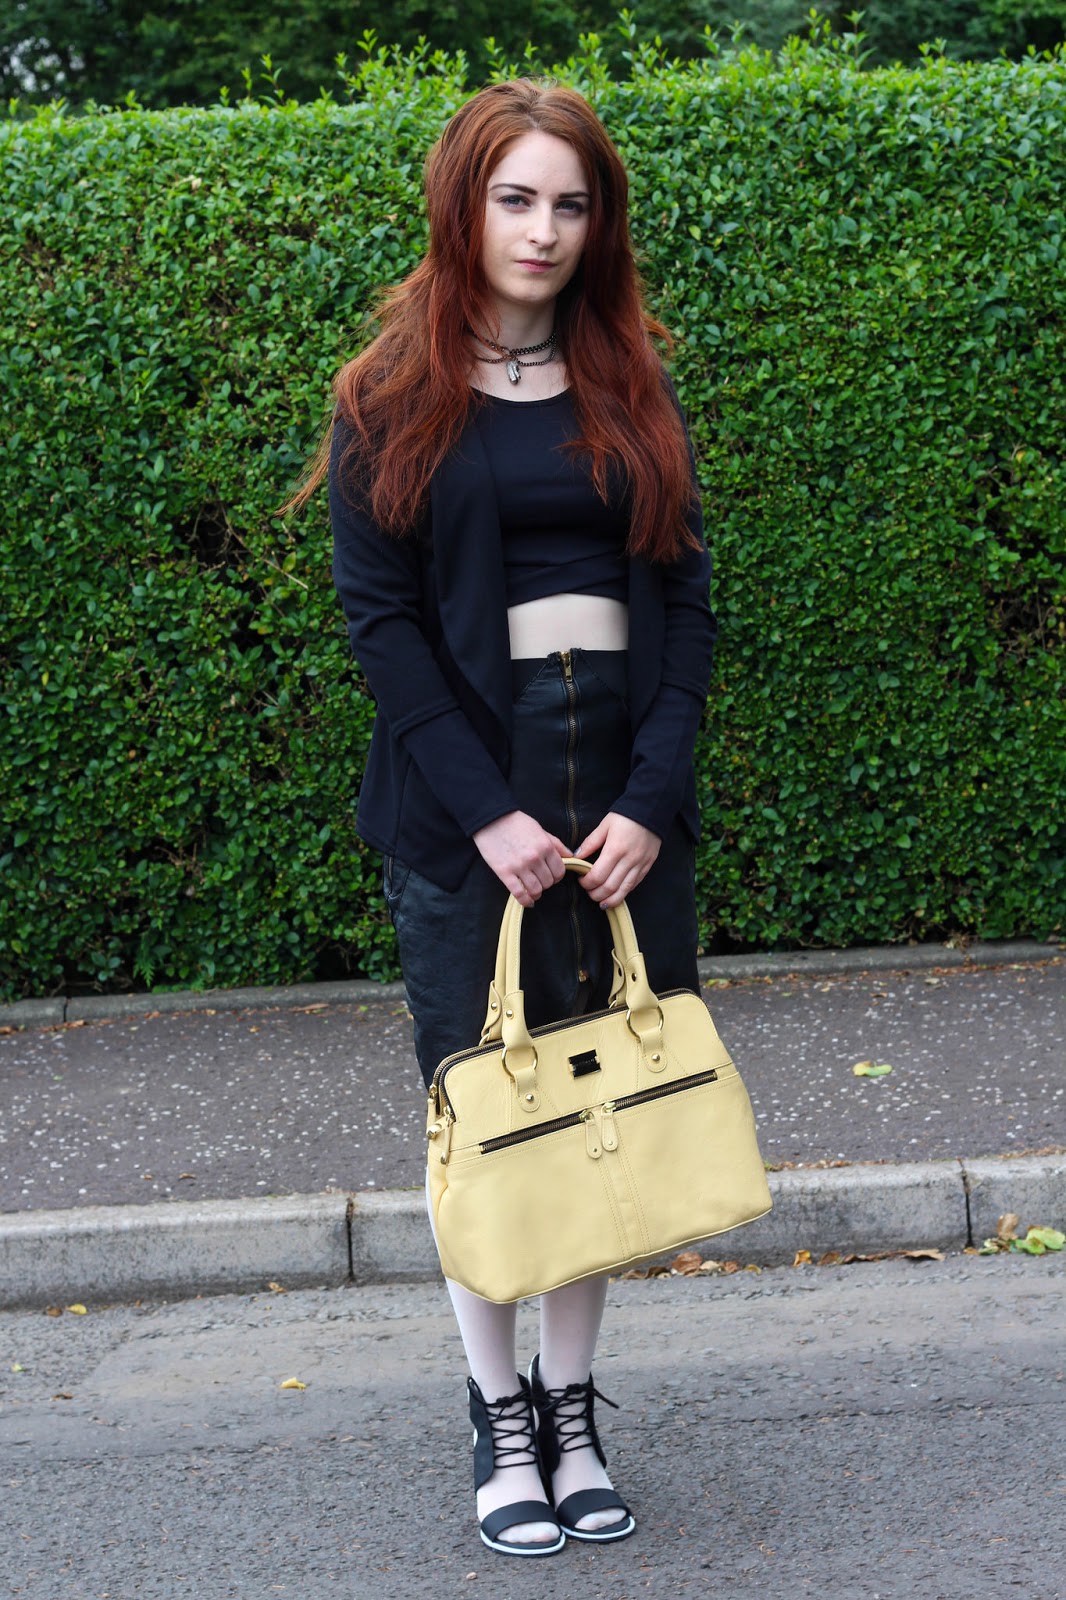 Jenny proves white opaque tights are a must-have item